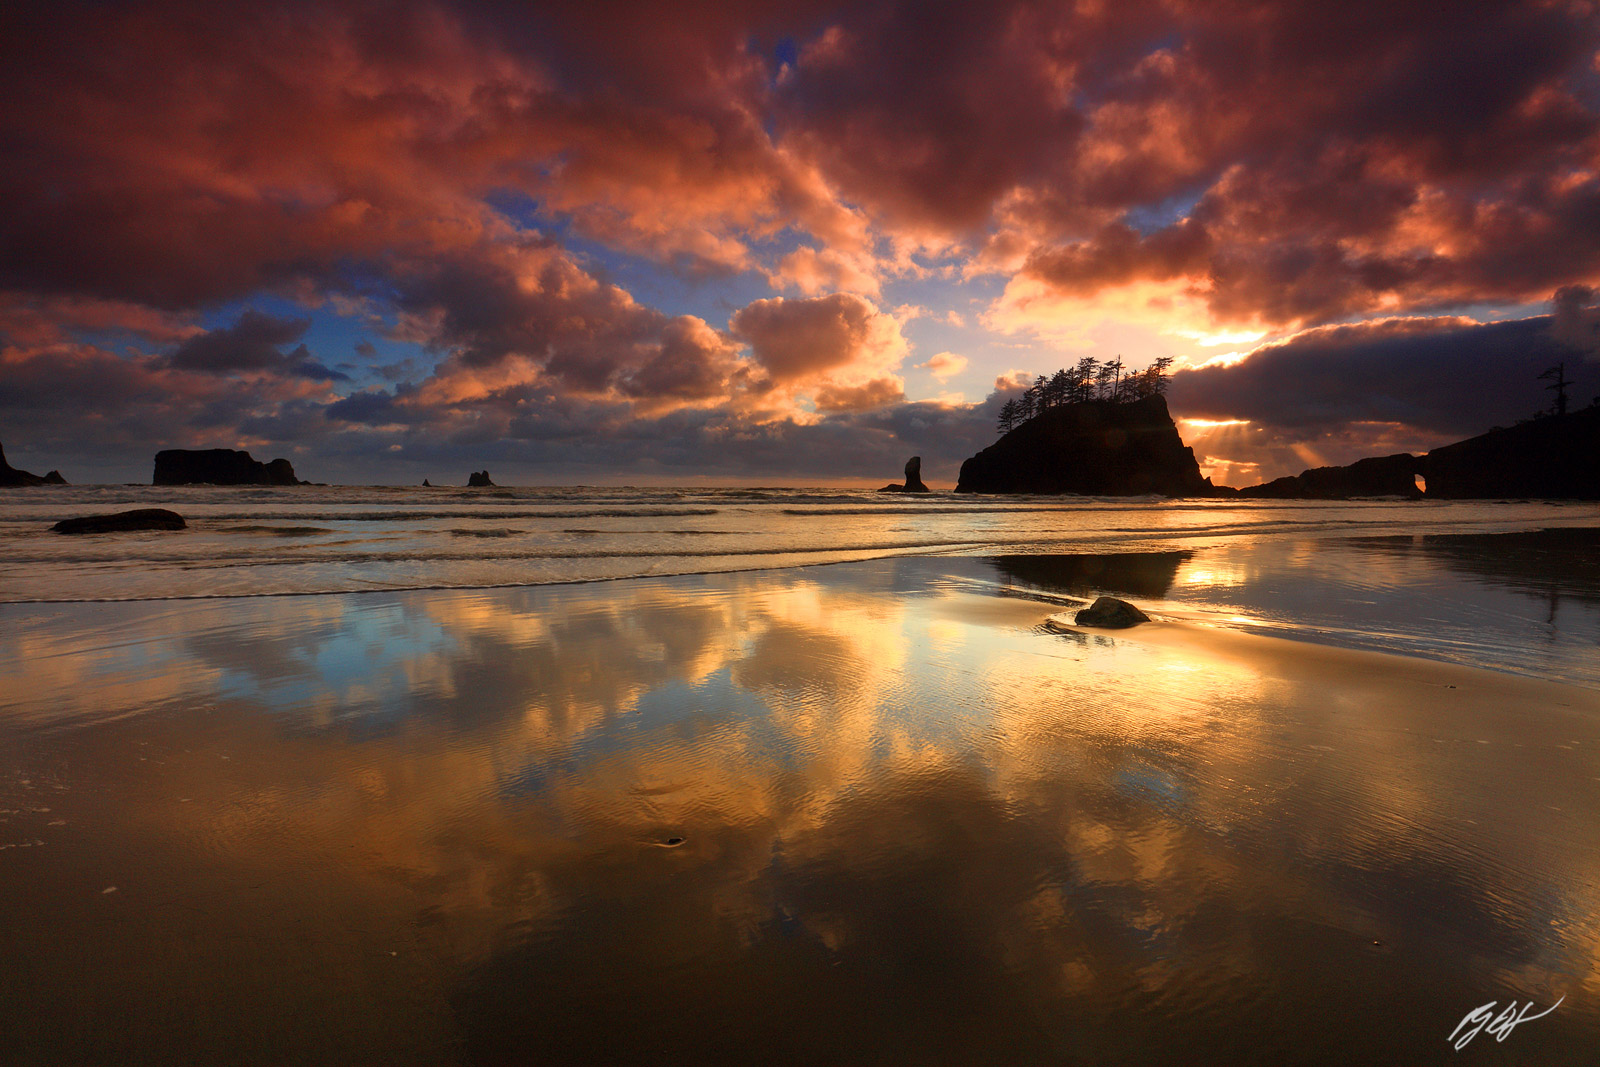 Sunset and Cloud Reflections on Second Beach in Olympic National Park in Washington